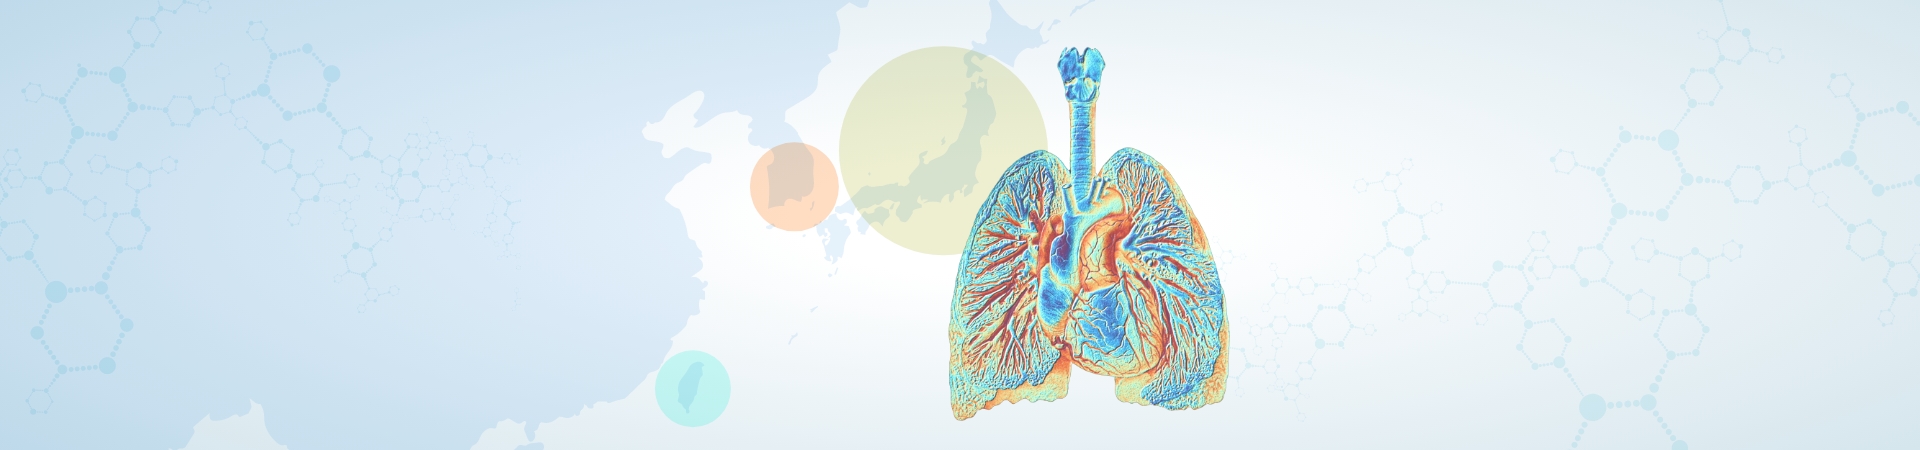 Breathing in a new era: a comparative analysis of lung cancer policies in Japan, South Korea and Taiwan